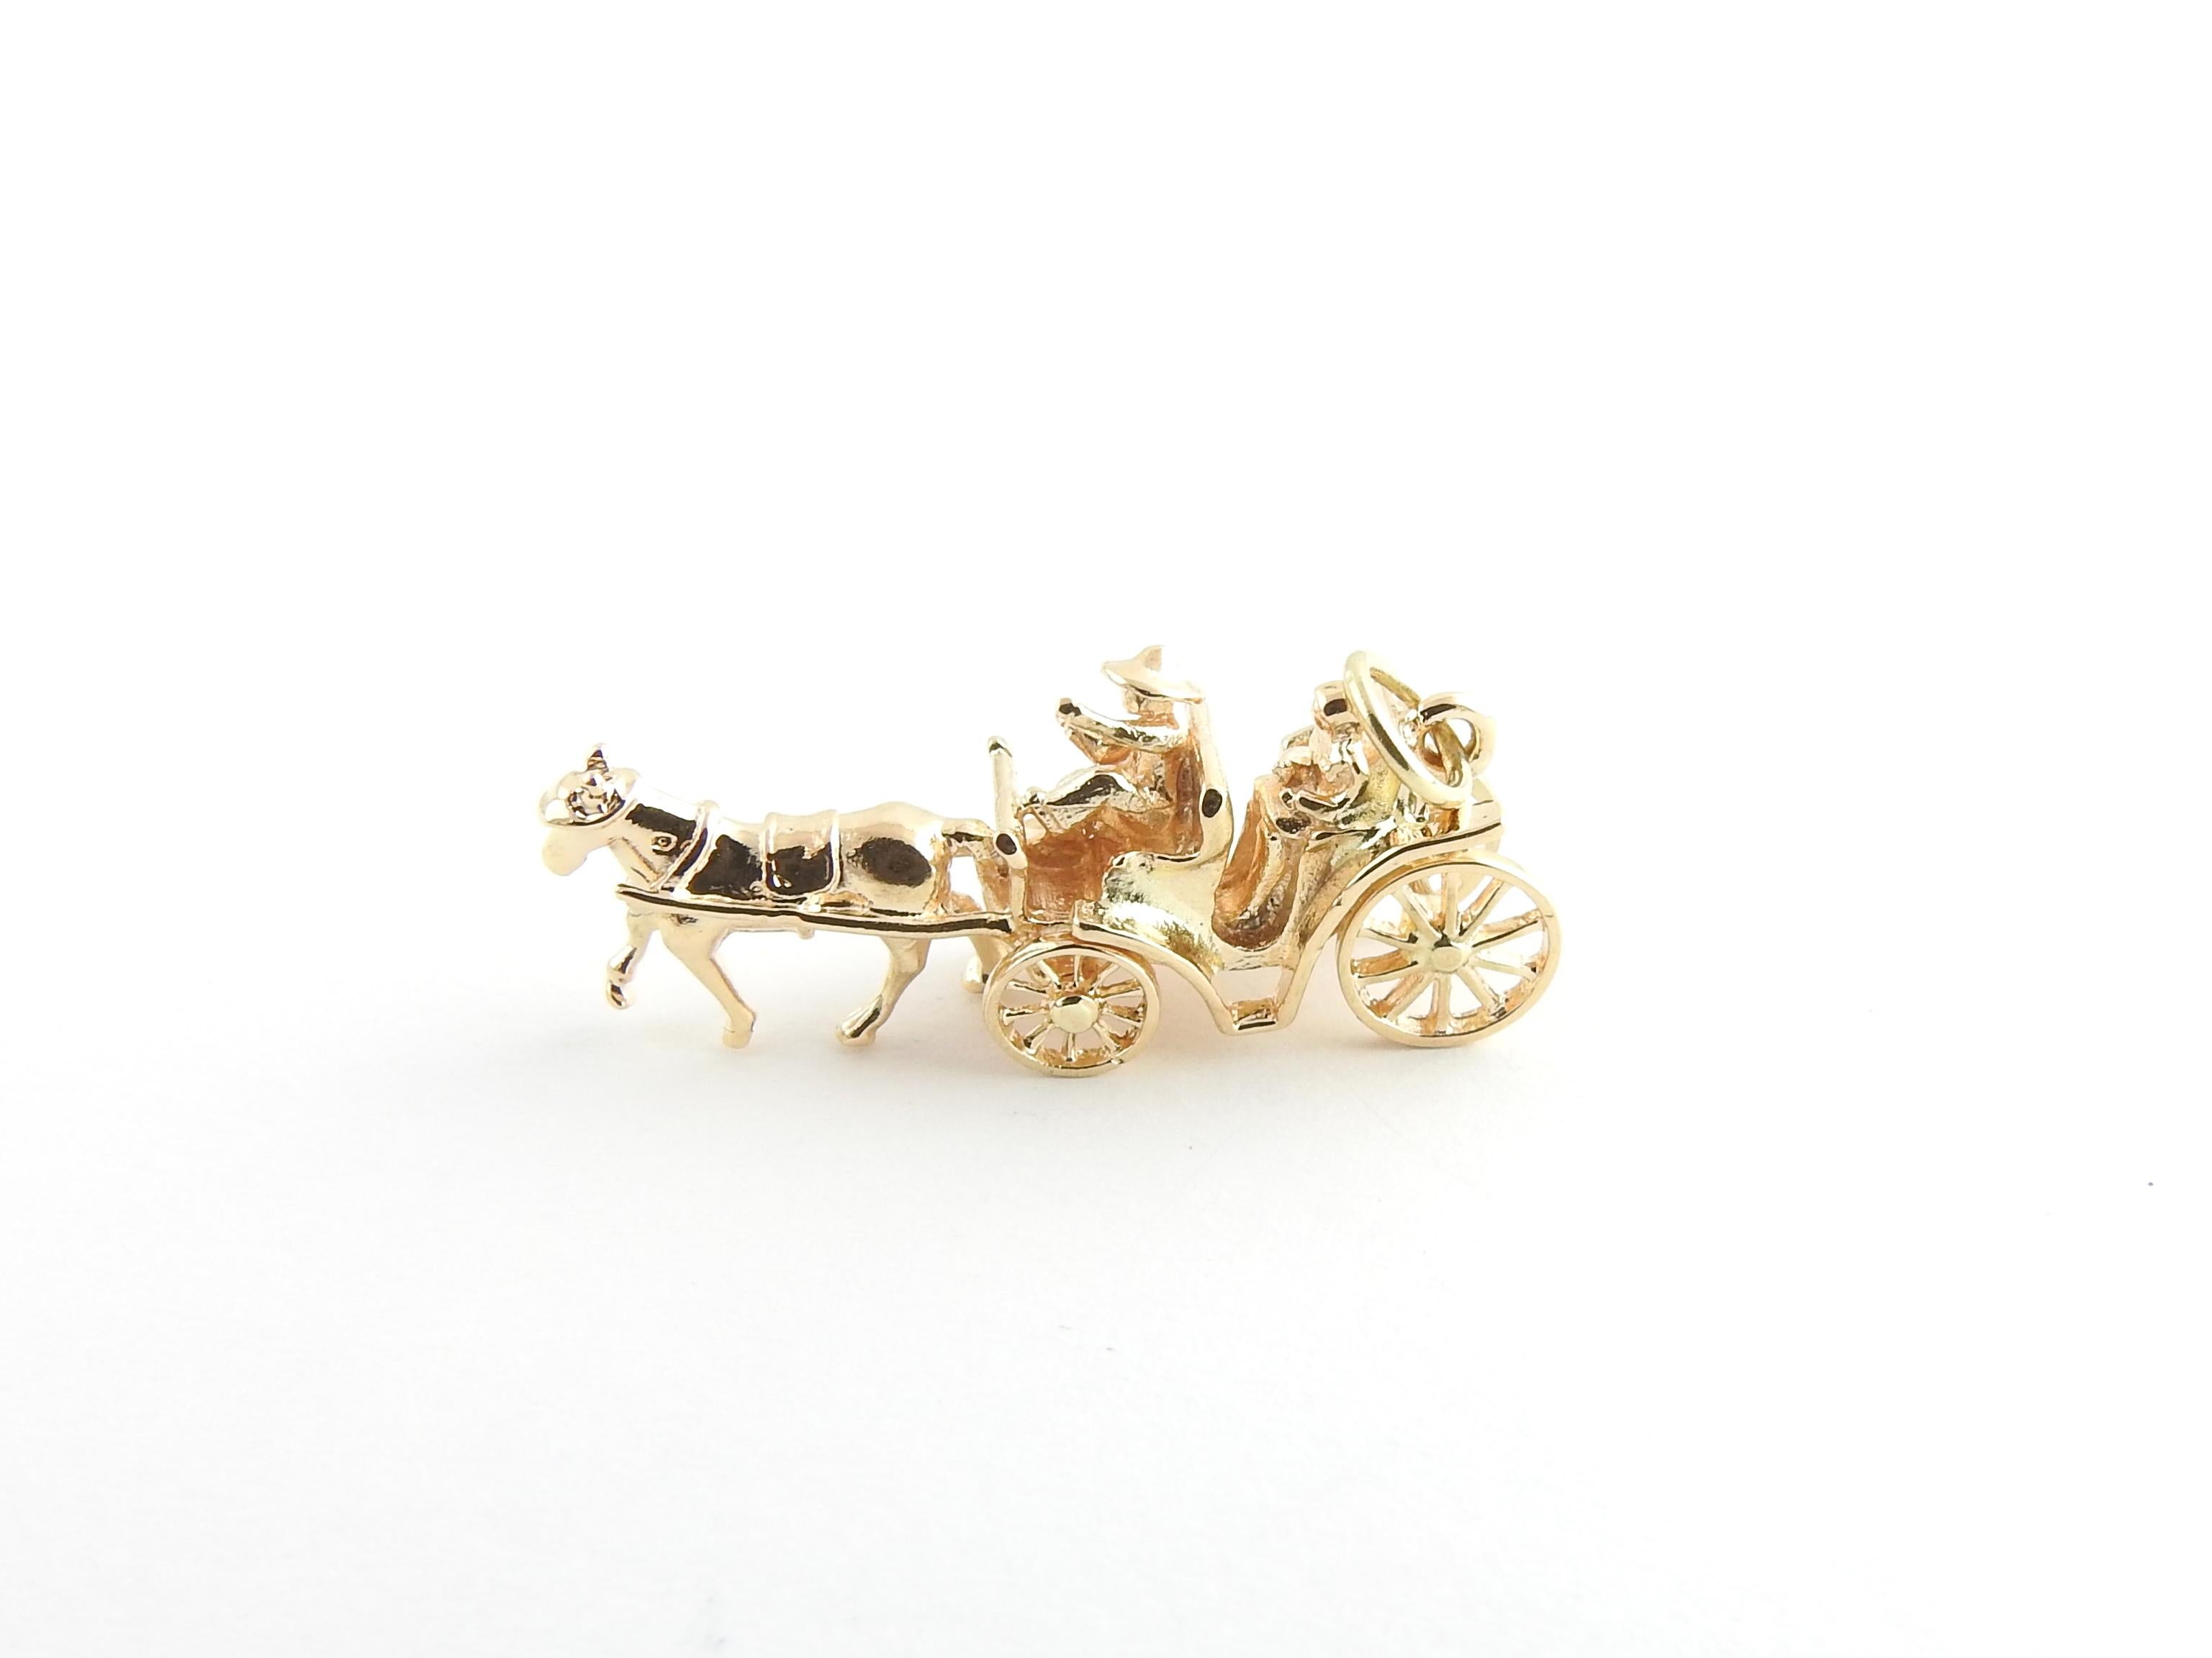 Vintage 14 Karat Yellow Gold Horse and Carriage Charm

This 3D charm features a moving wheels and plenty of detail! The horse and driver carry their passenger in a beautifully detailed carriage. Crafted in classic 14K yellow gold.

Size: 30 mm x 12